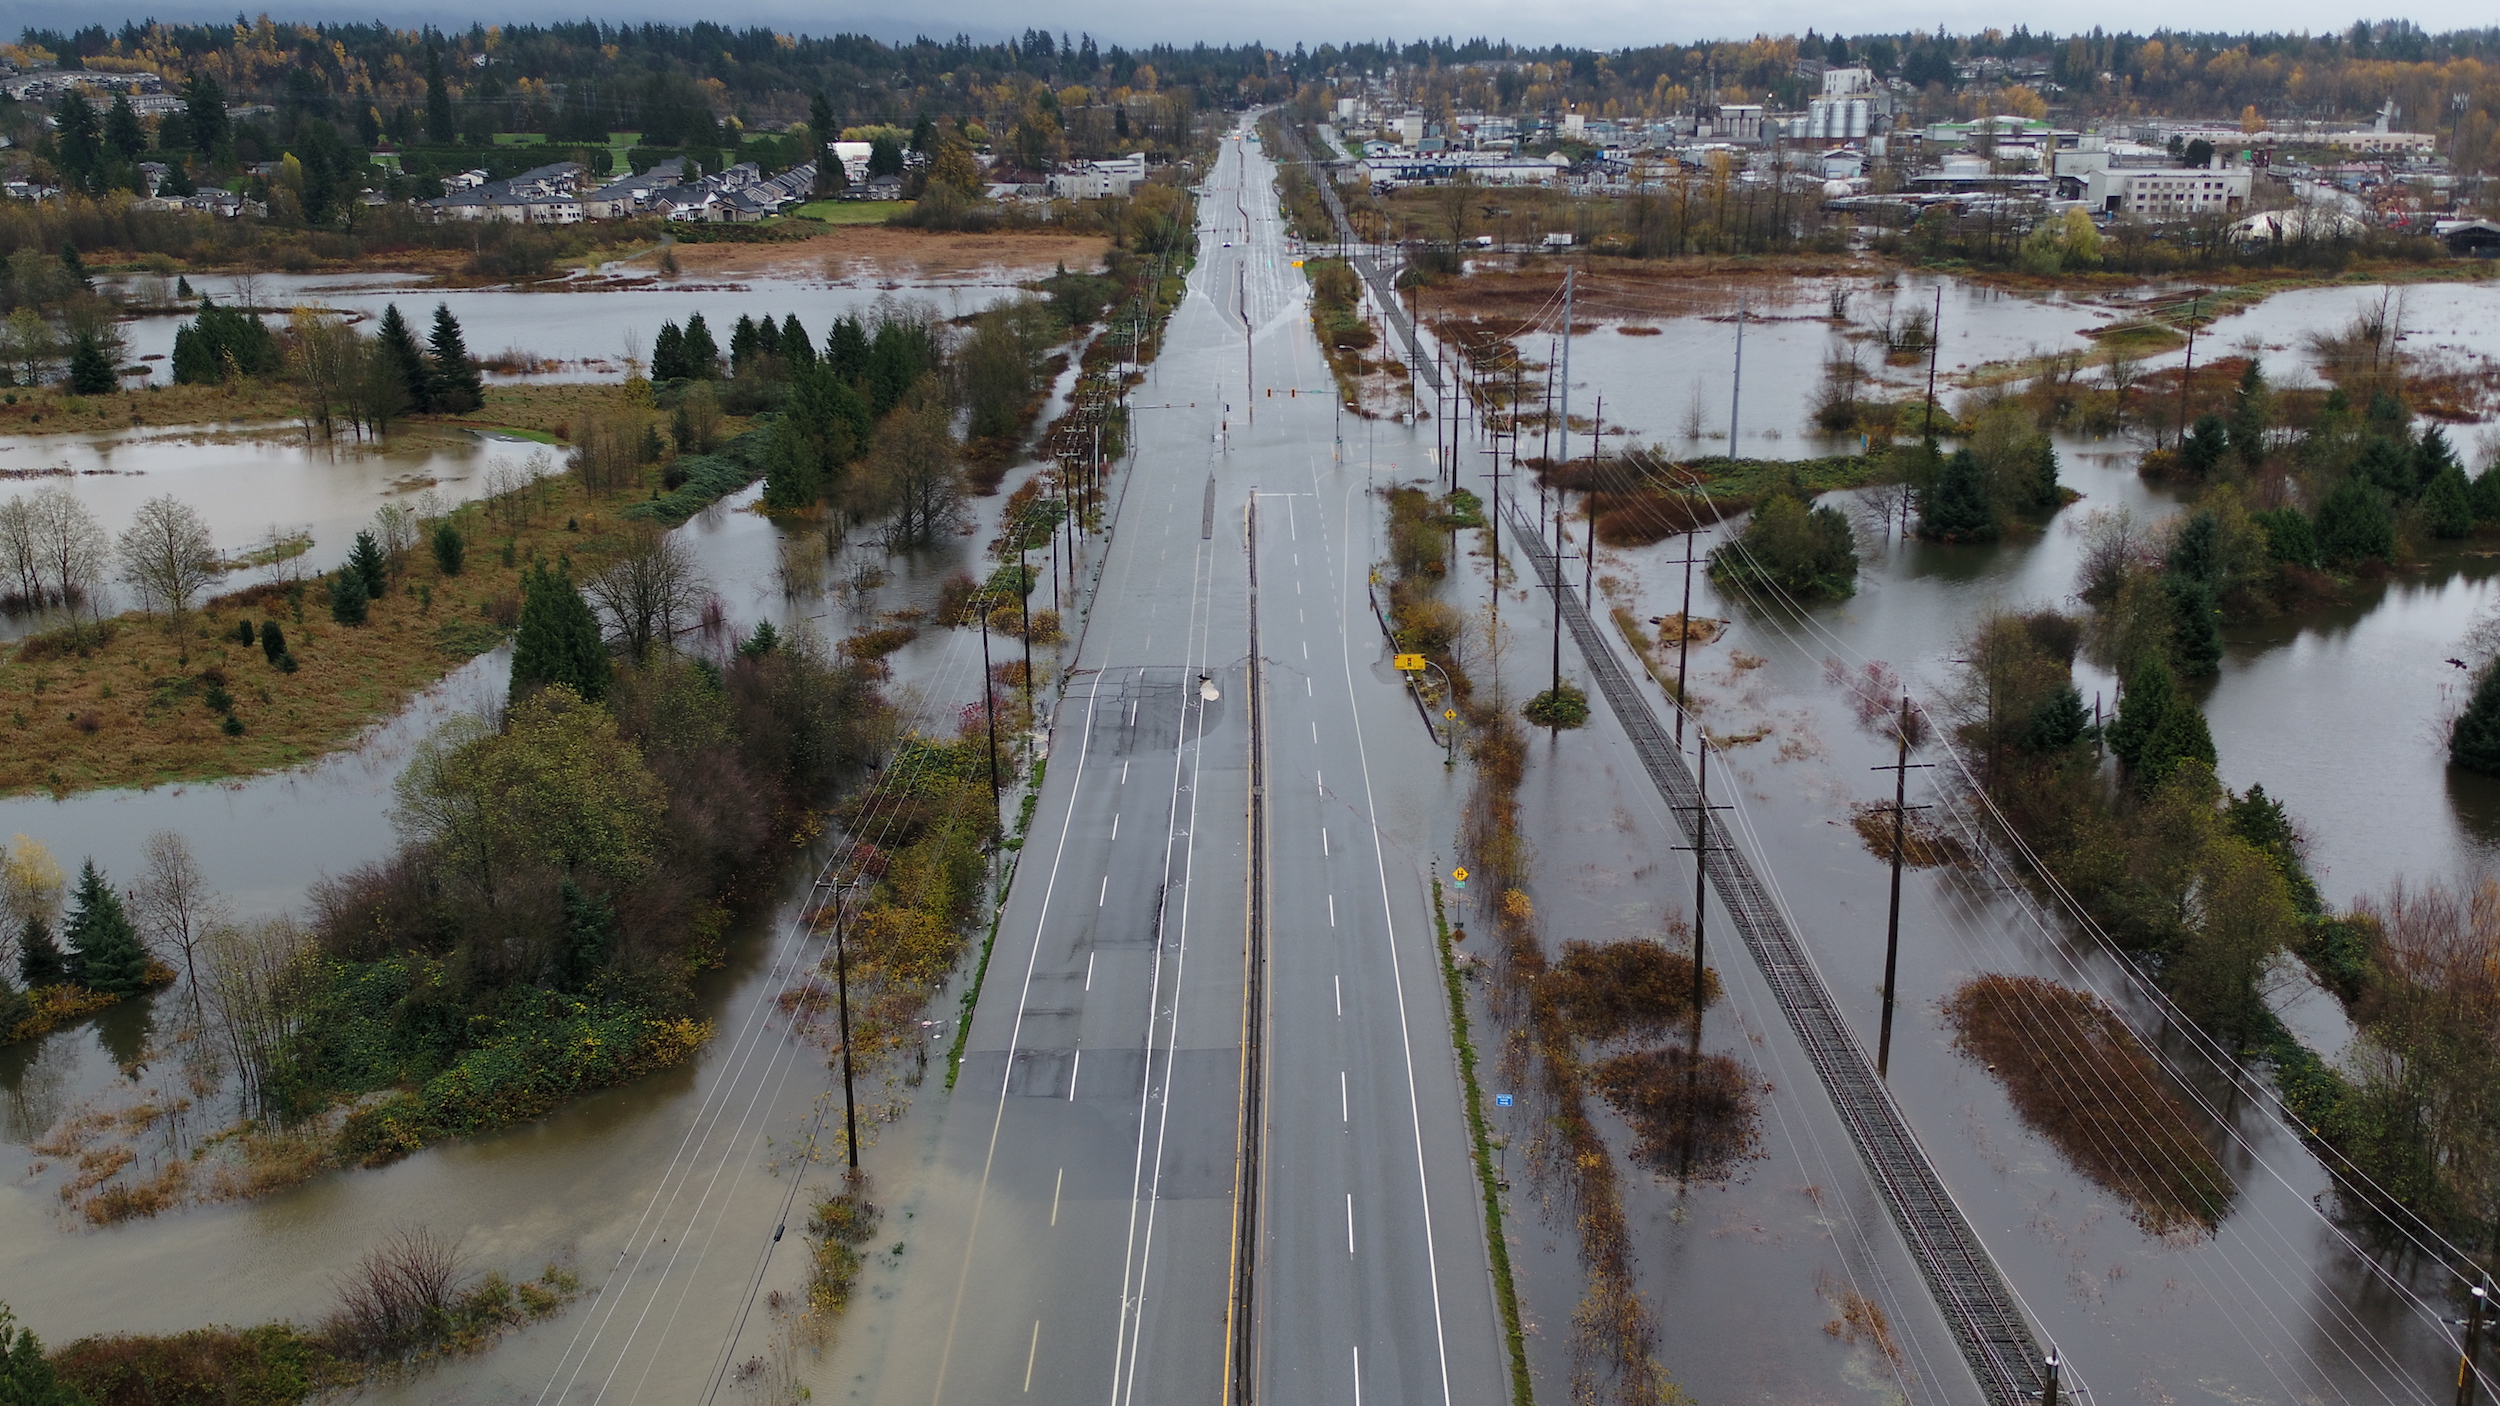 B.C. flooding: view of Highway 11, known as Abbotsford-Mission Highway